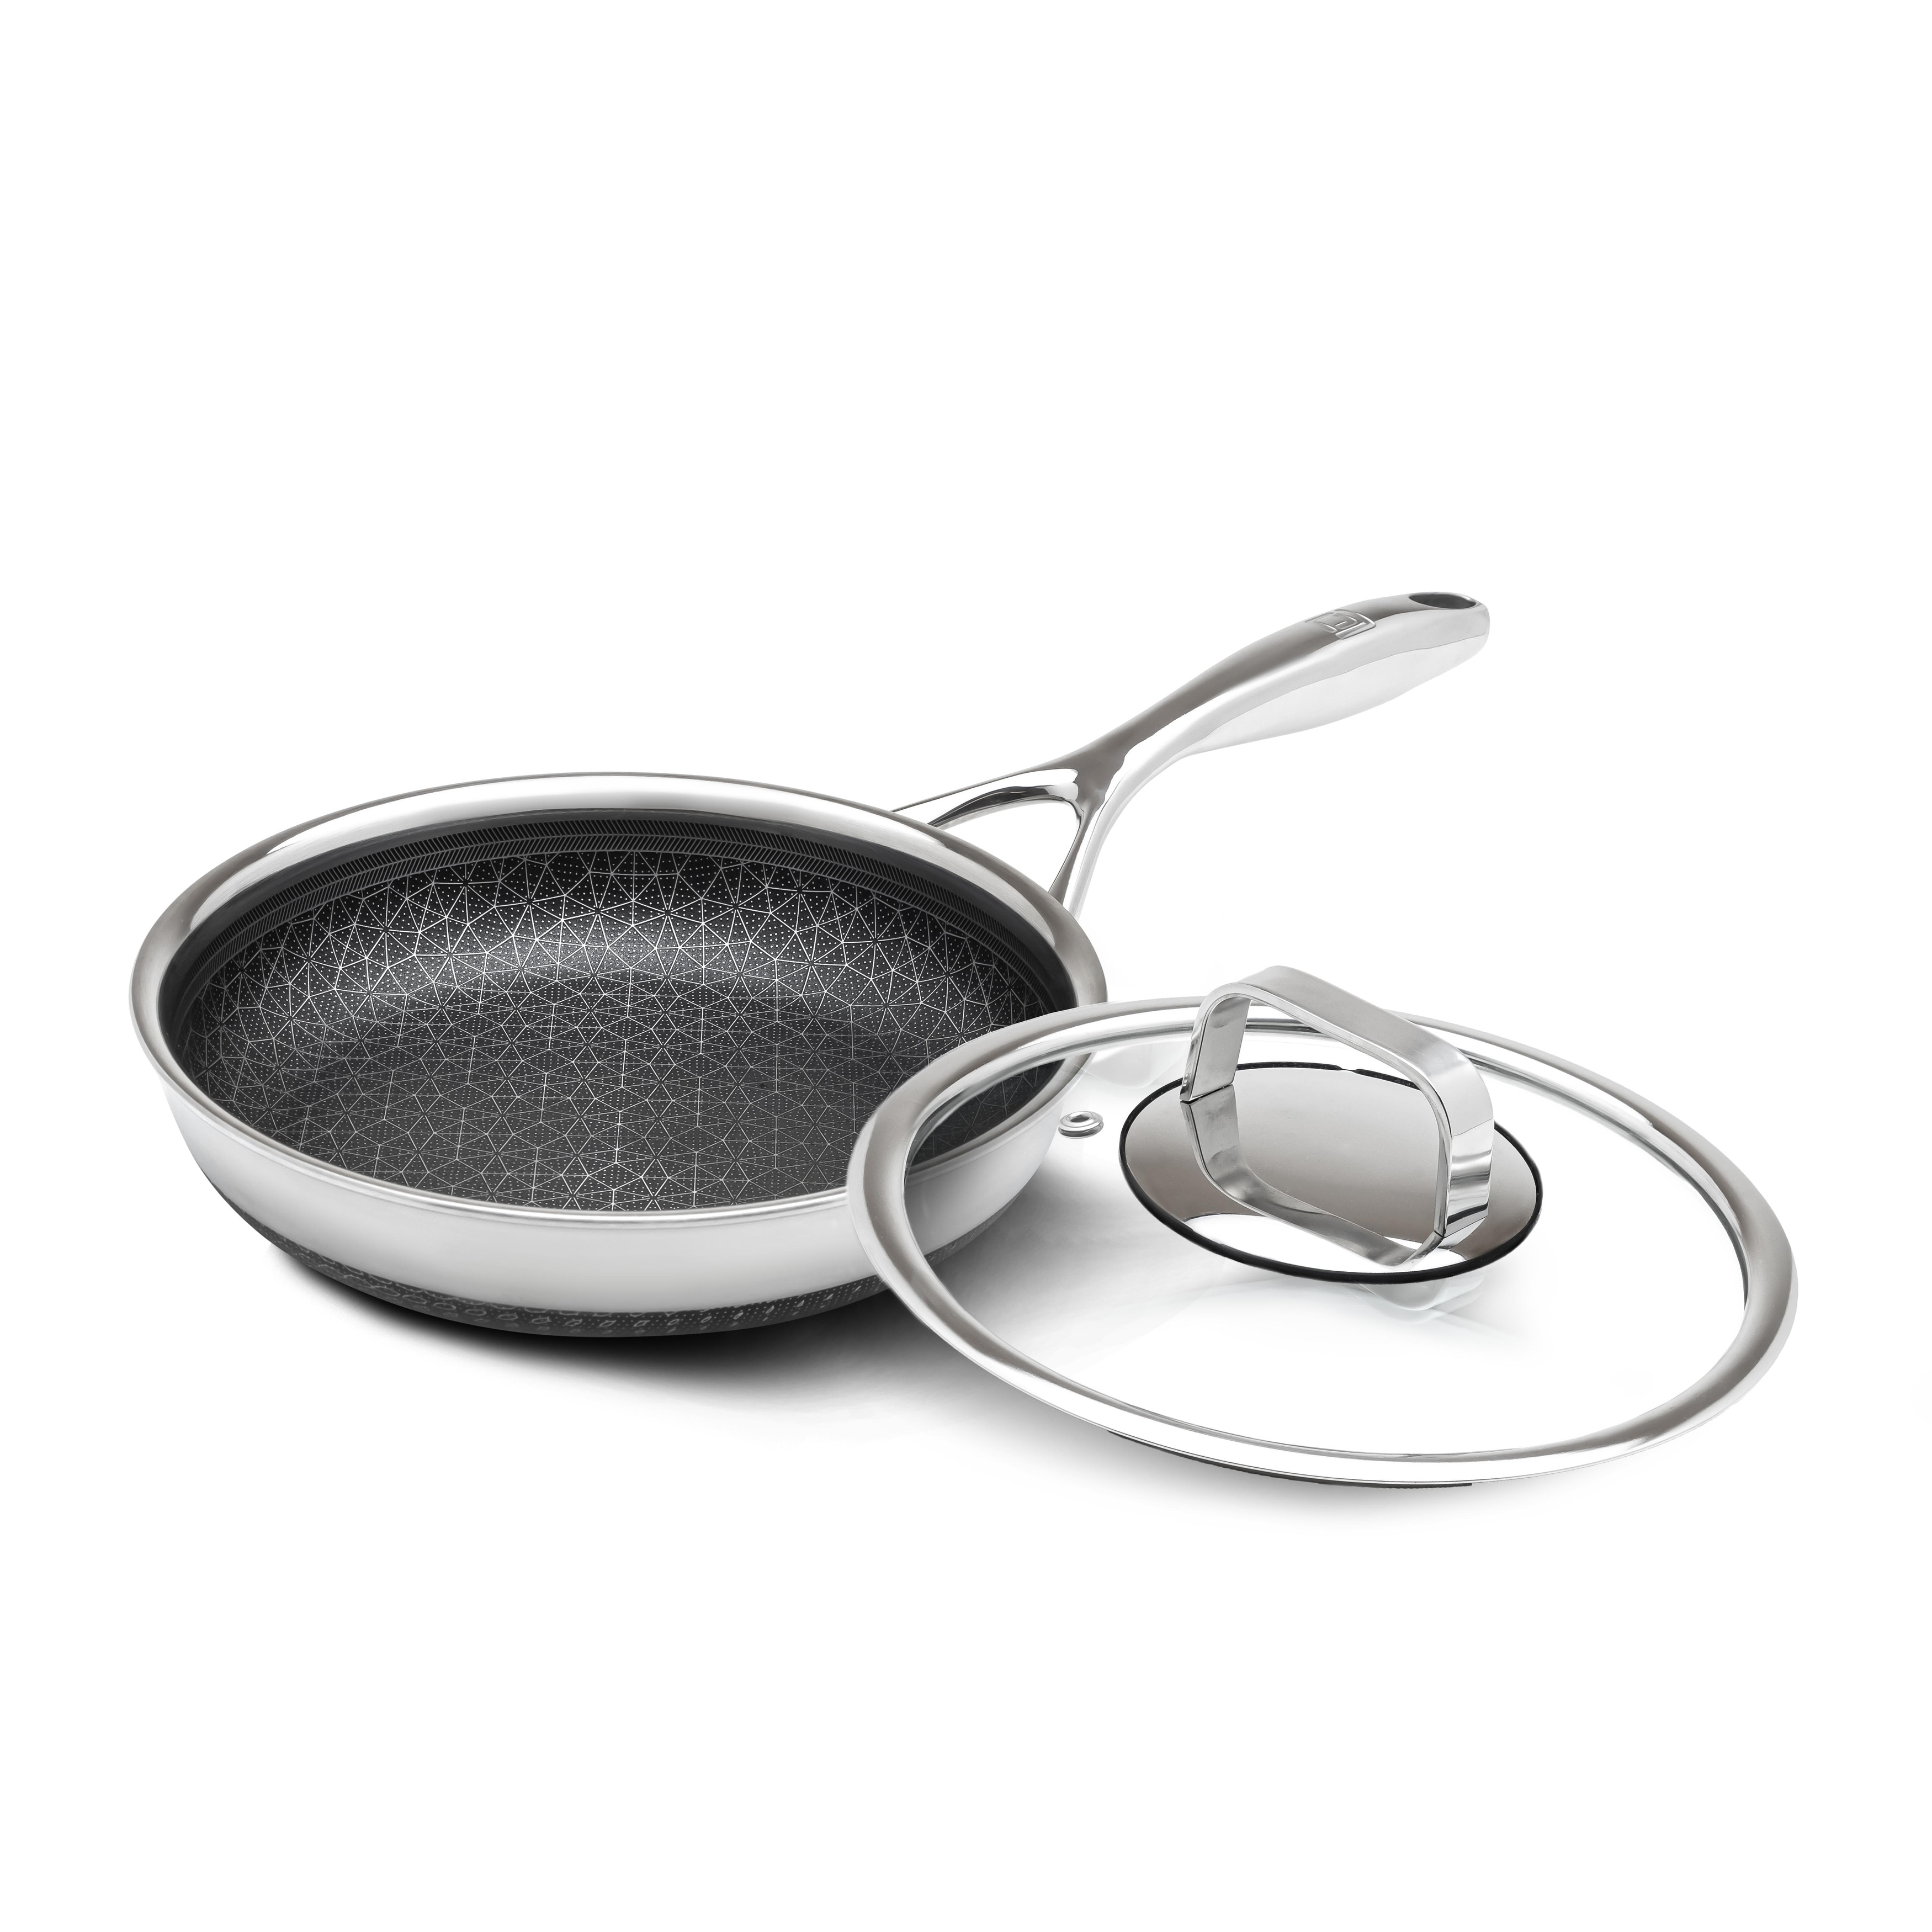 This PFOA-free Non-Stick Cooking Set Is 's Deal Of The Day